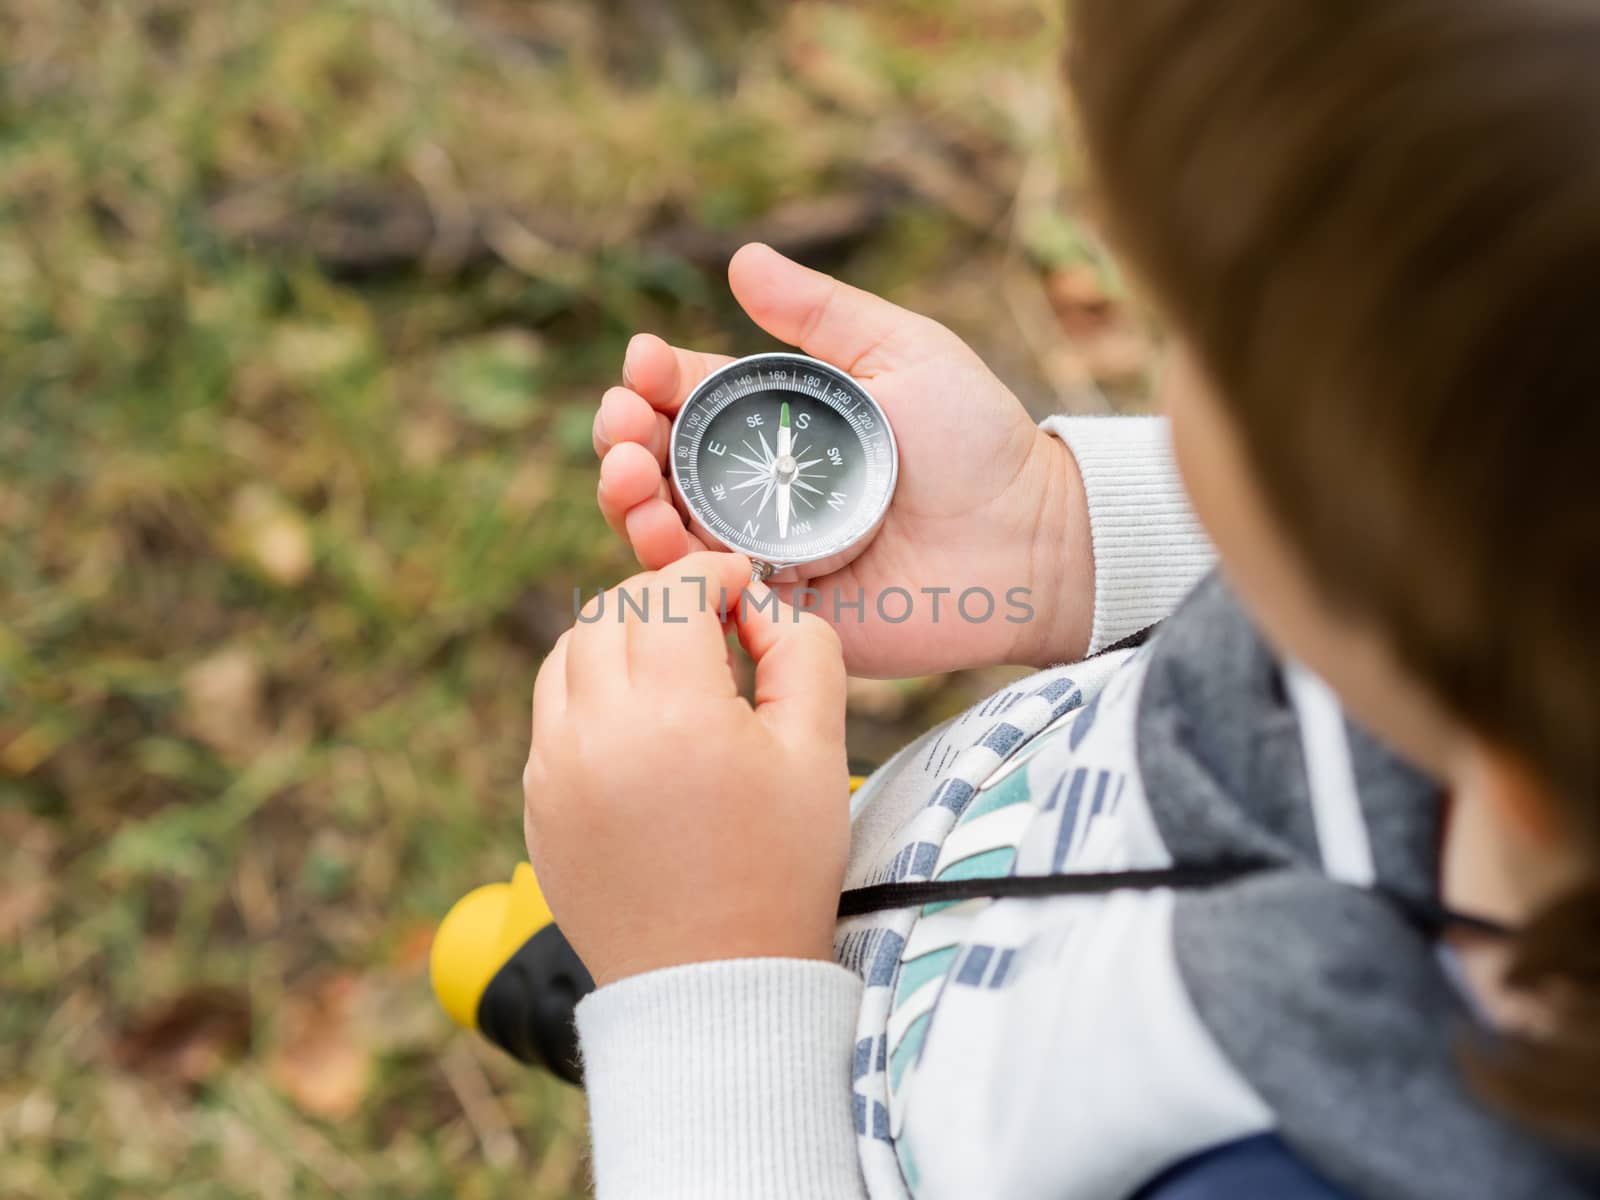 Little explorer on hike in forest. Boy with binoculars, backpack, water bottle and rope sits on stump and reads map. Outdoor leisure activity for children. Summer journey for young tourist.